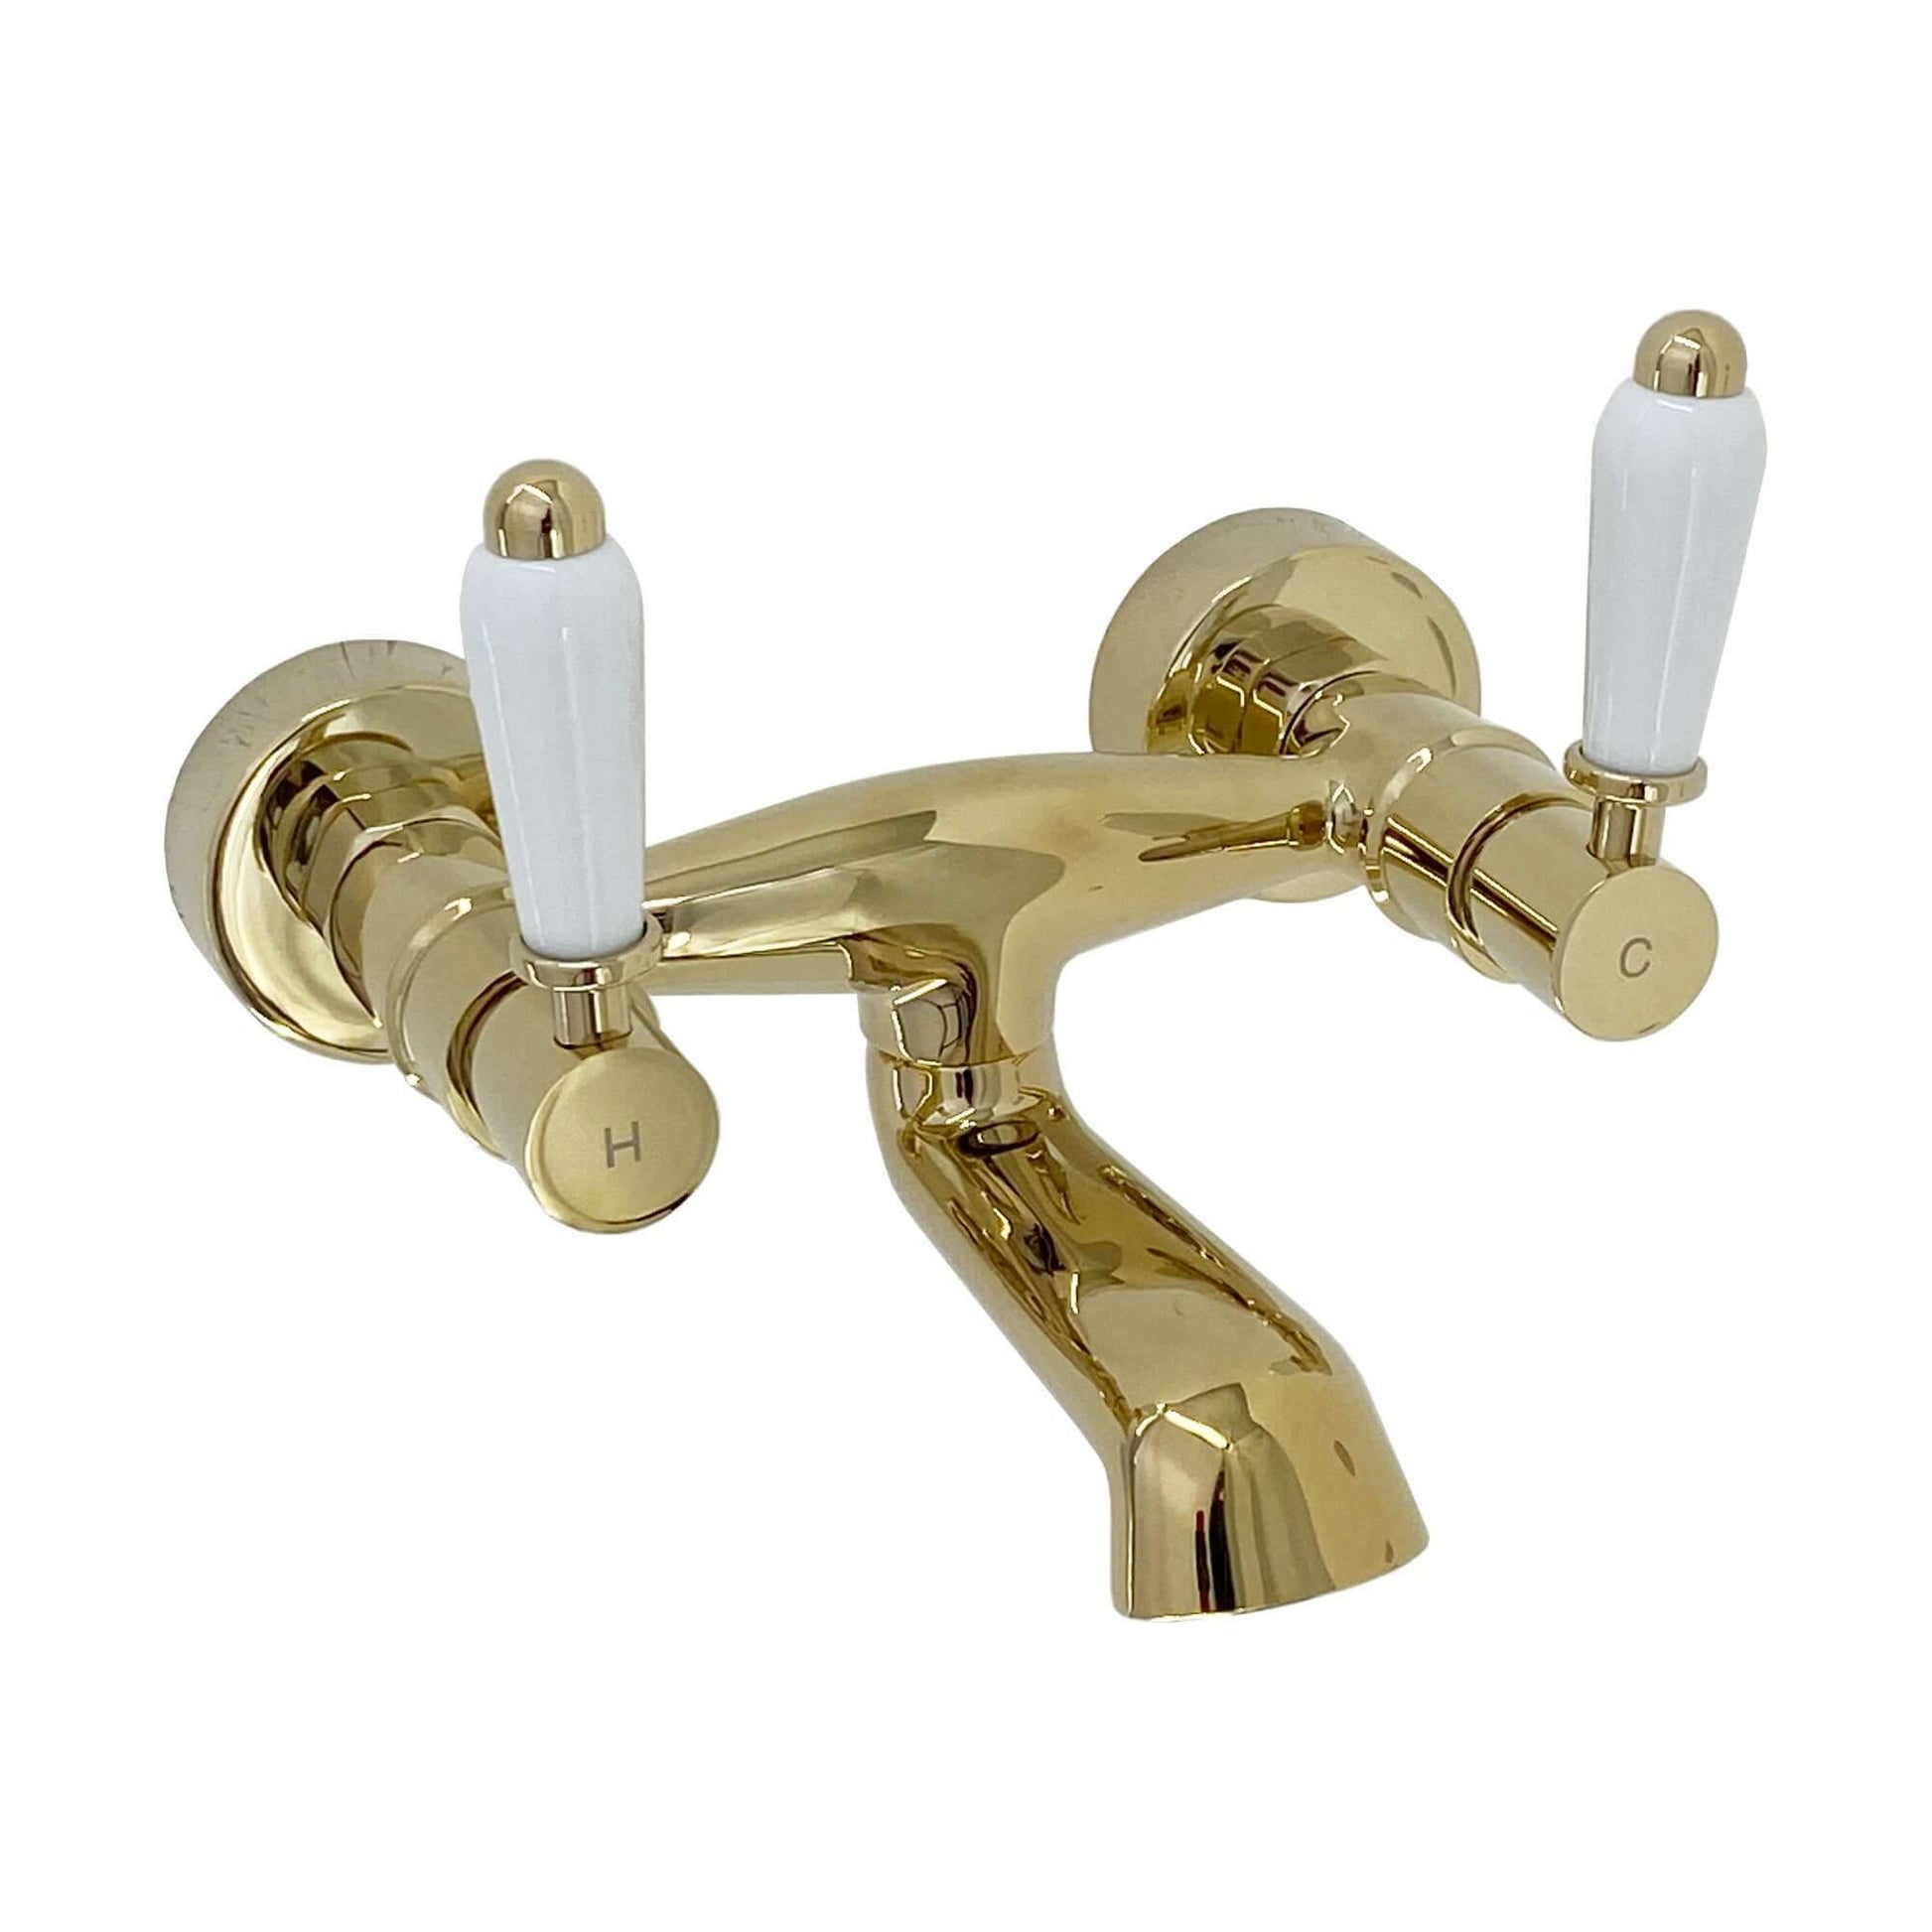 Downton wall mounted bath mixer tap with white ceramic levers - English gold - Taps